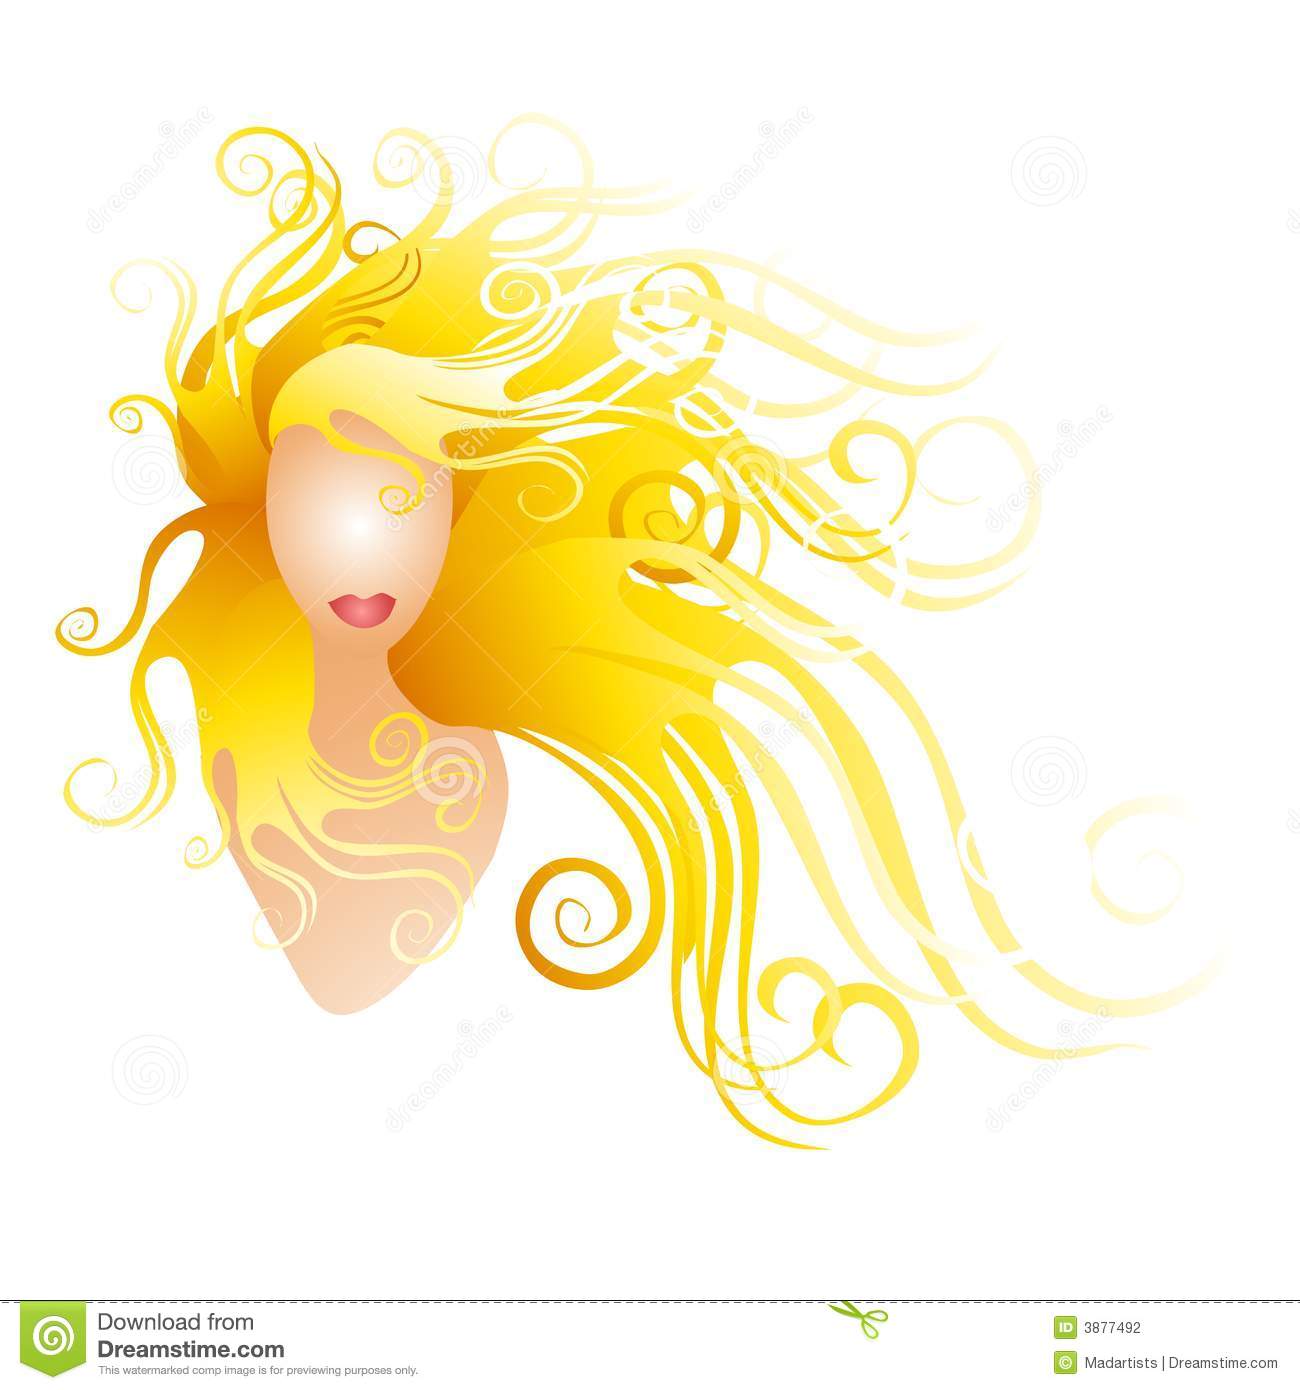 Woman With Long Blonde Flowing Hair Stock Photography   Image  3877492